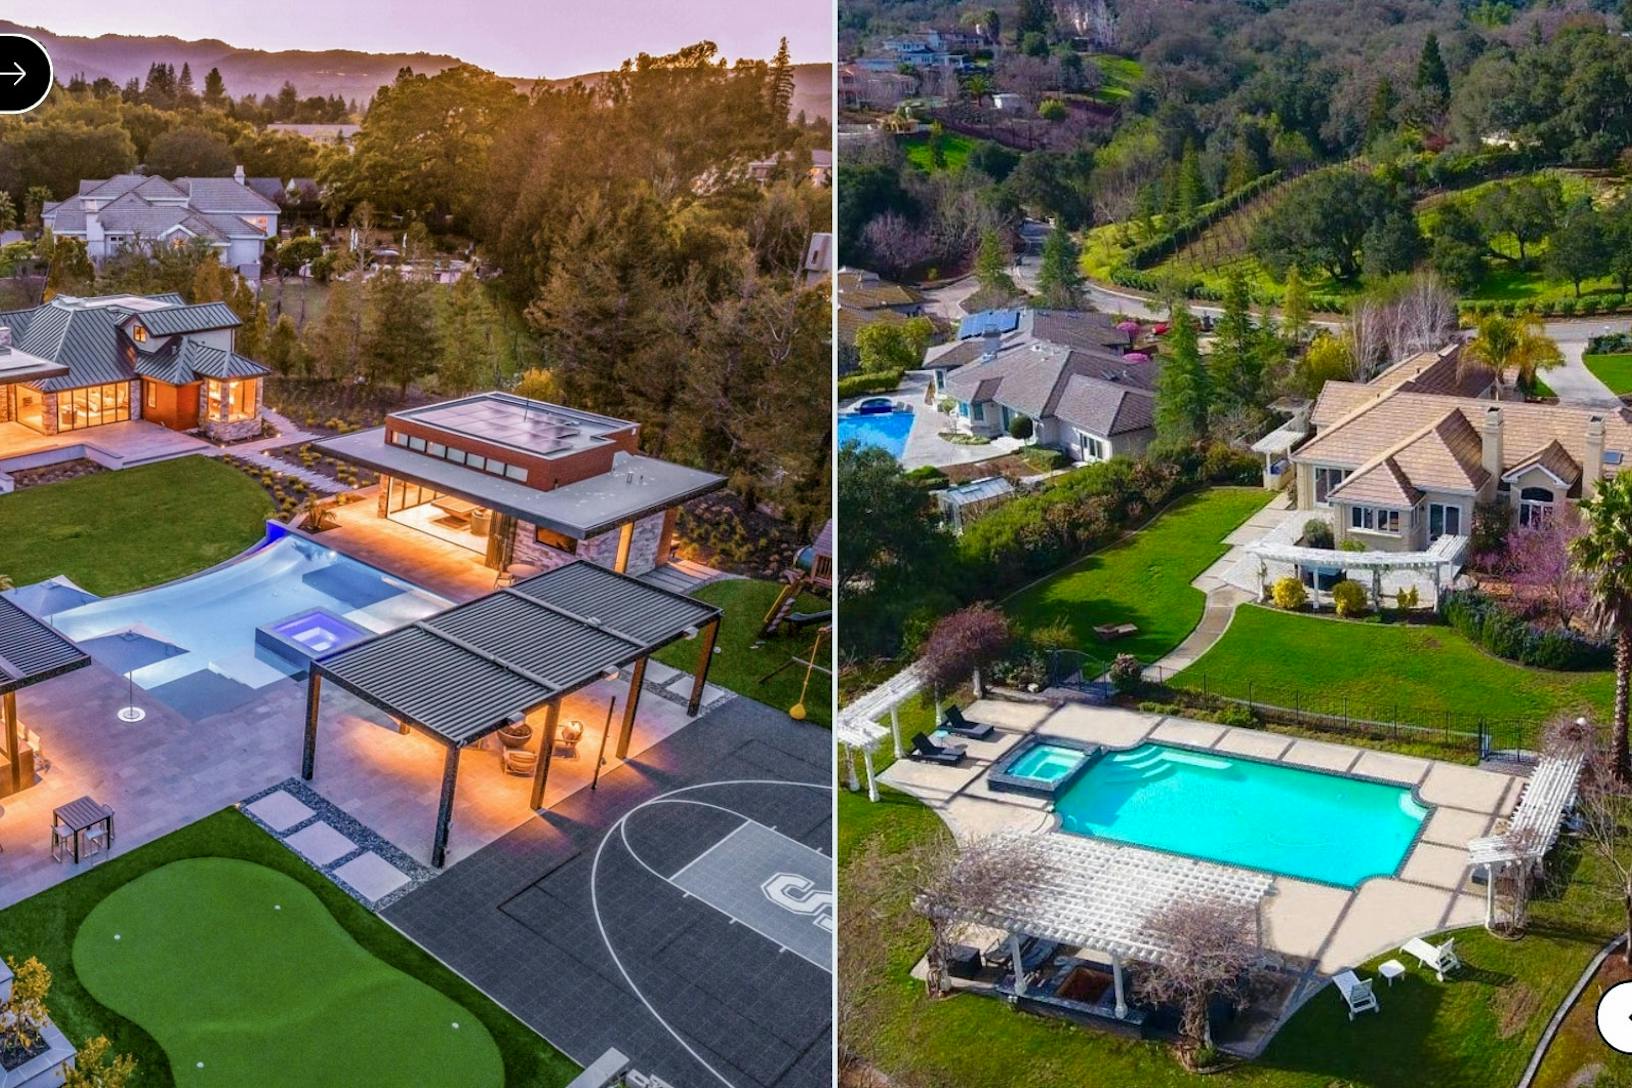 An aerial view of a home with bifold glass doors, a pool, and a golf course